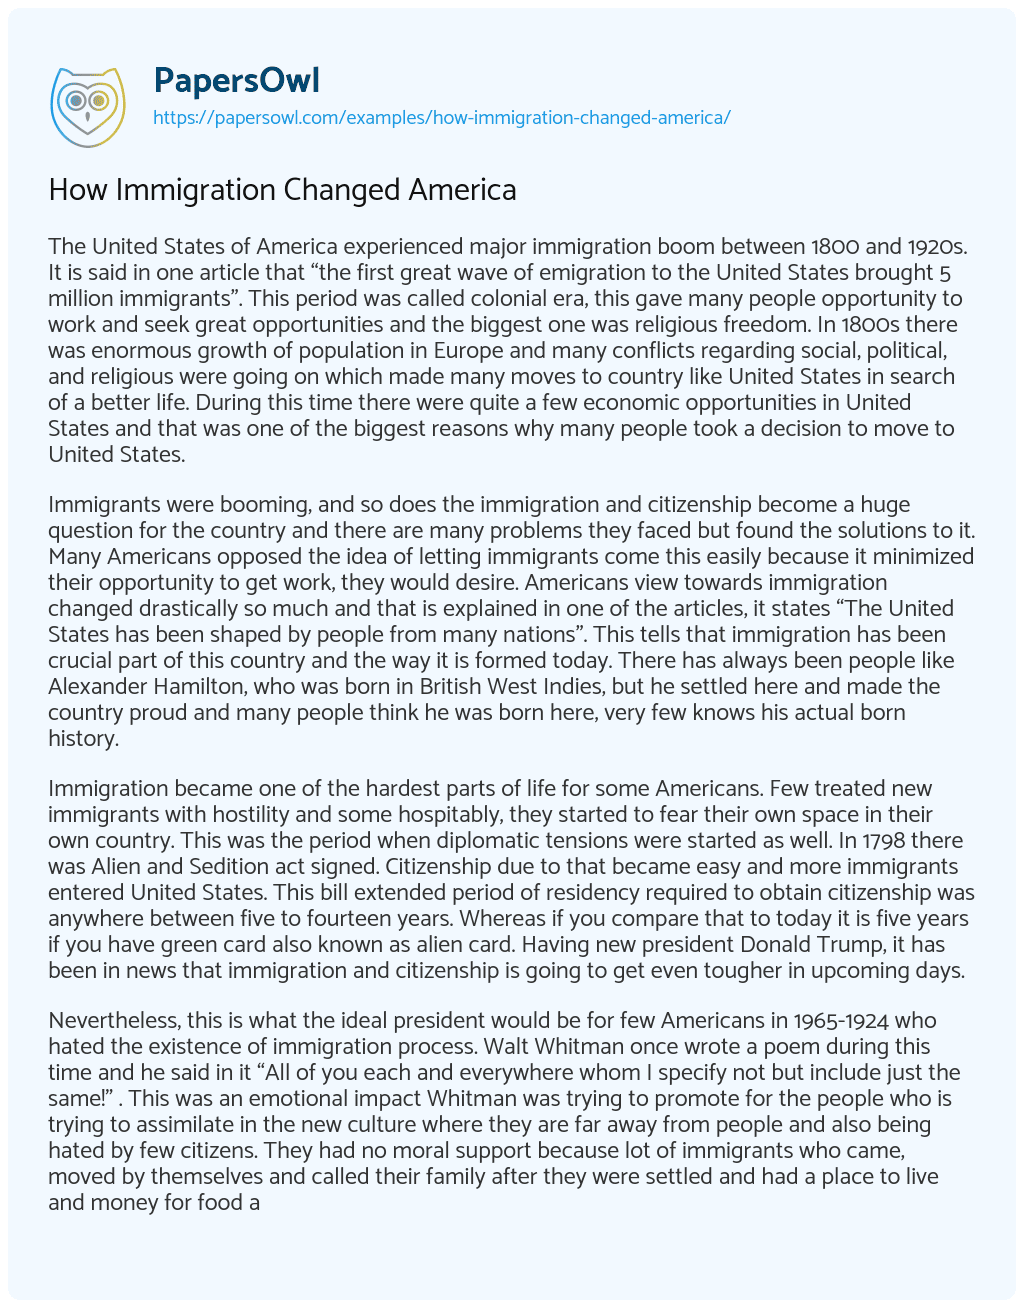 Essay on How Immigration Changed America